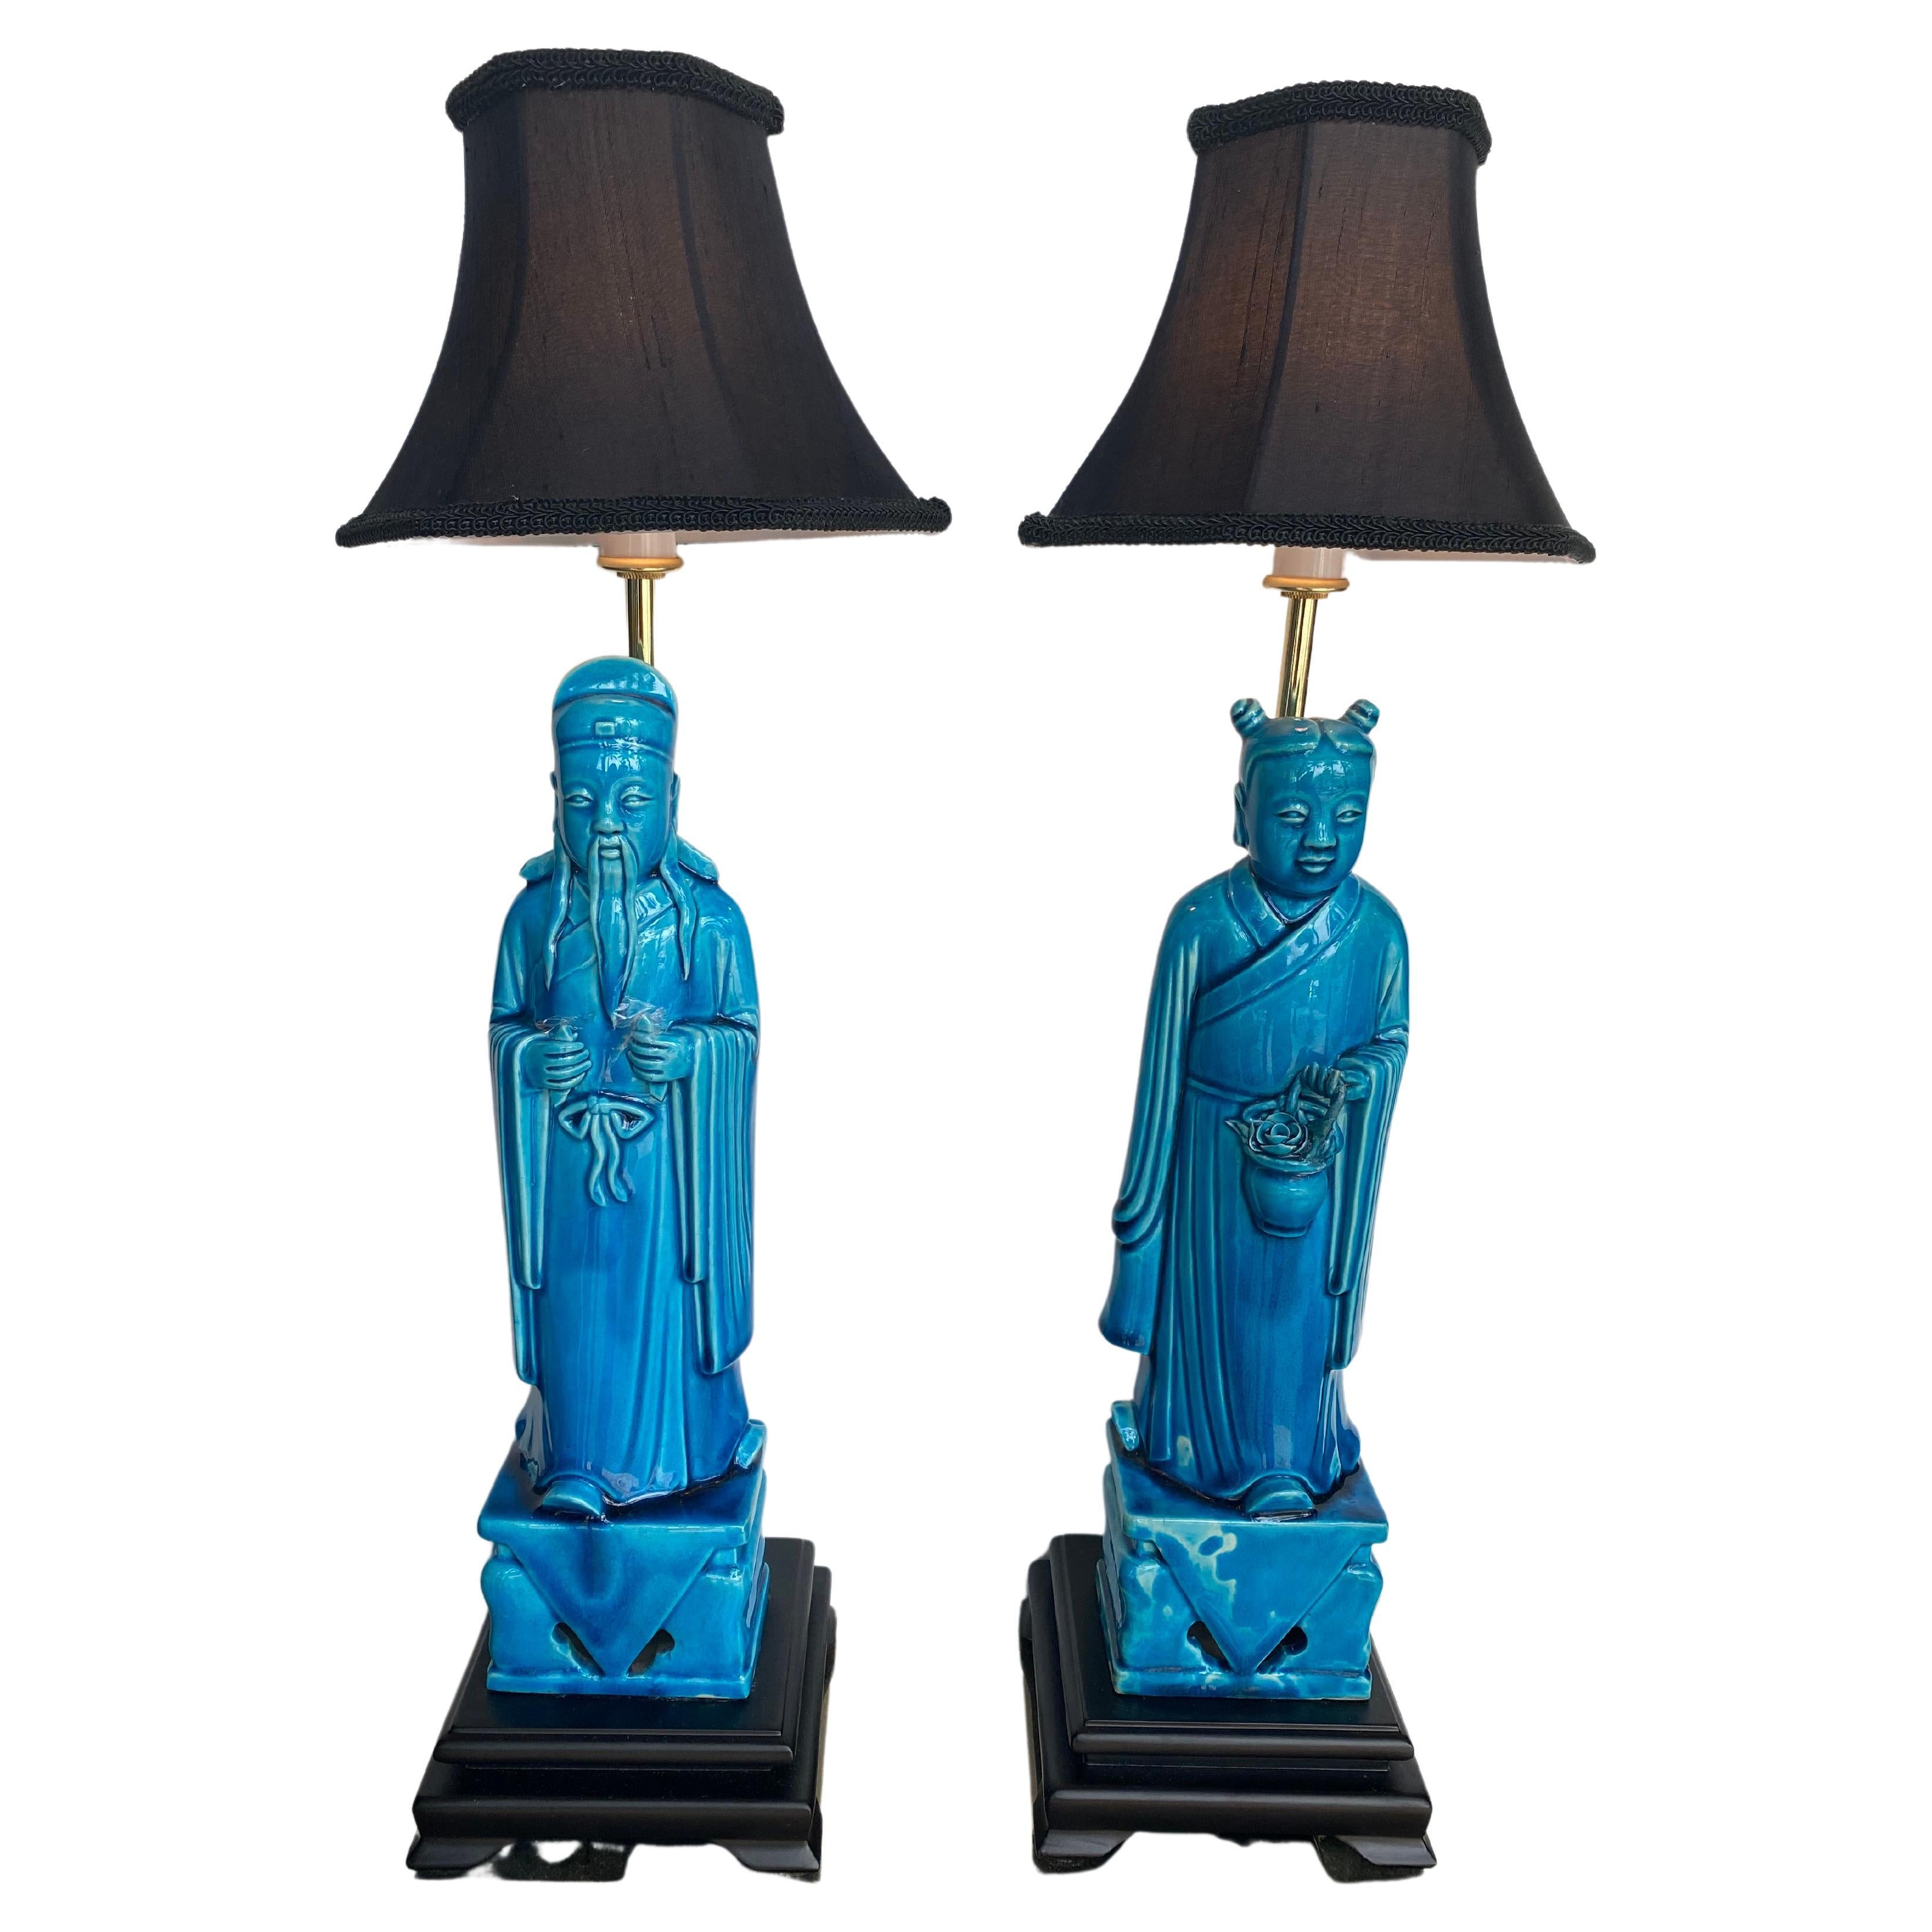 Pair of Chinese Turquoise Lamps Having Black Shades